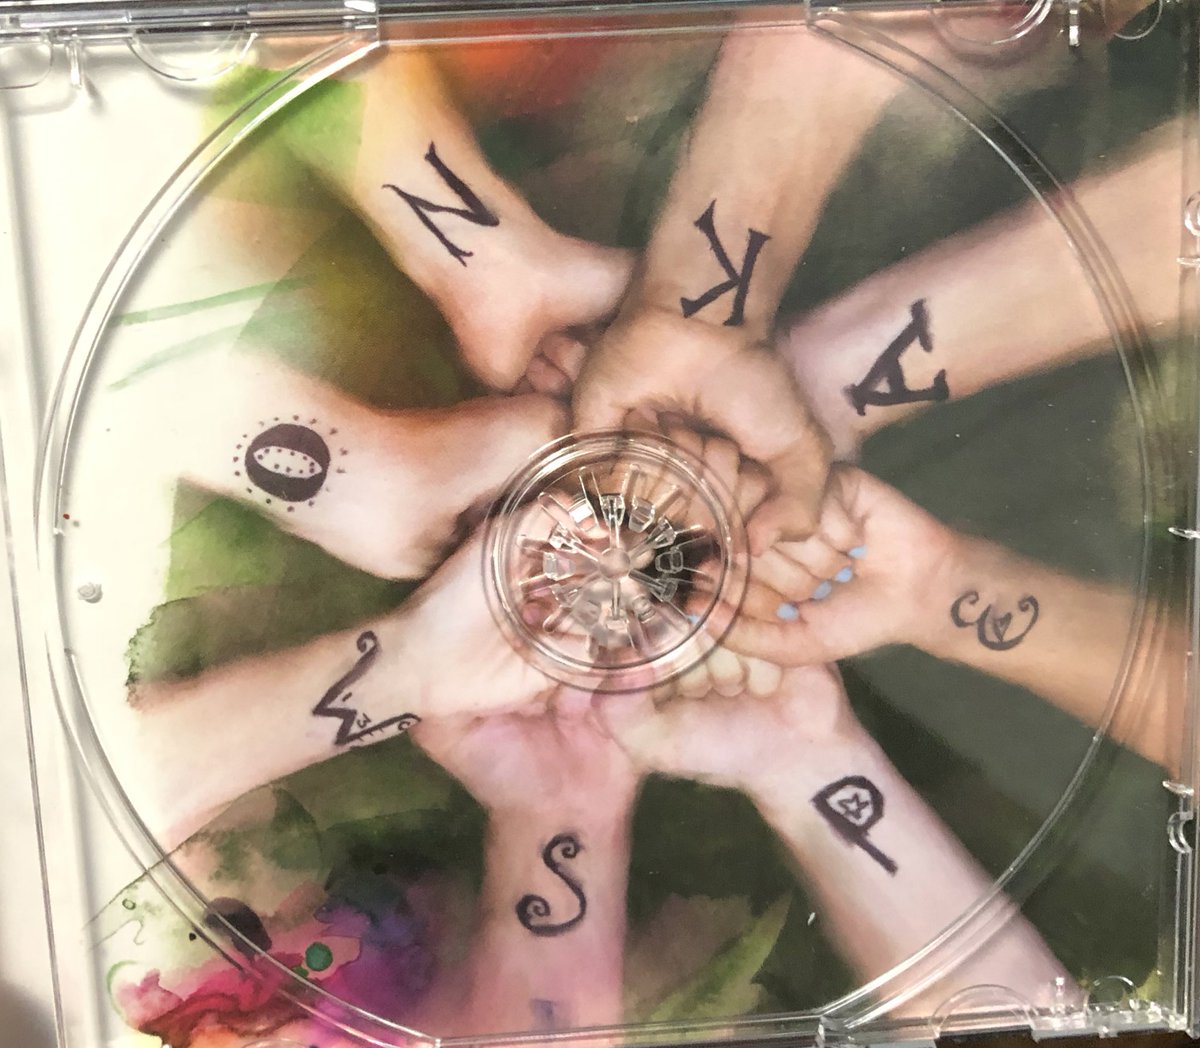 Also... “one of these things is not like the other, like a rainbow with all of the colors” ... funny how there are 8 wrists, one in black and white and the other in color with those same weird filters she was using at the beginning of the era, & disc 2 of deluxe has Lover vibes.